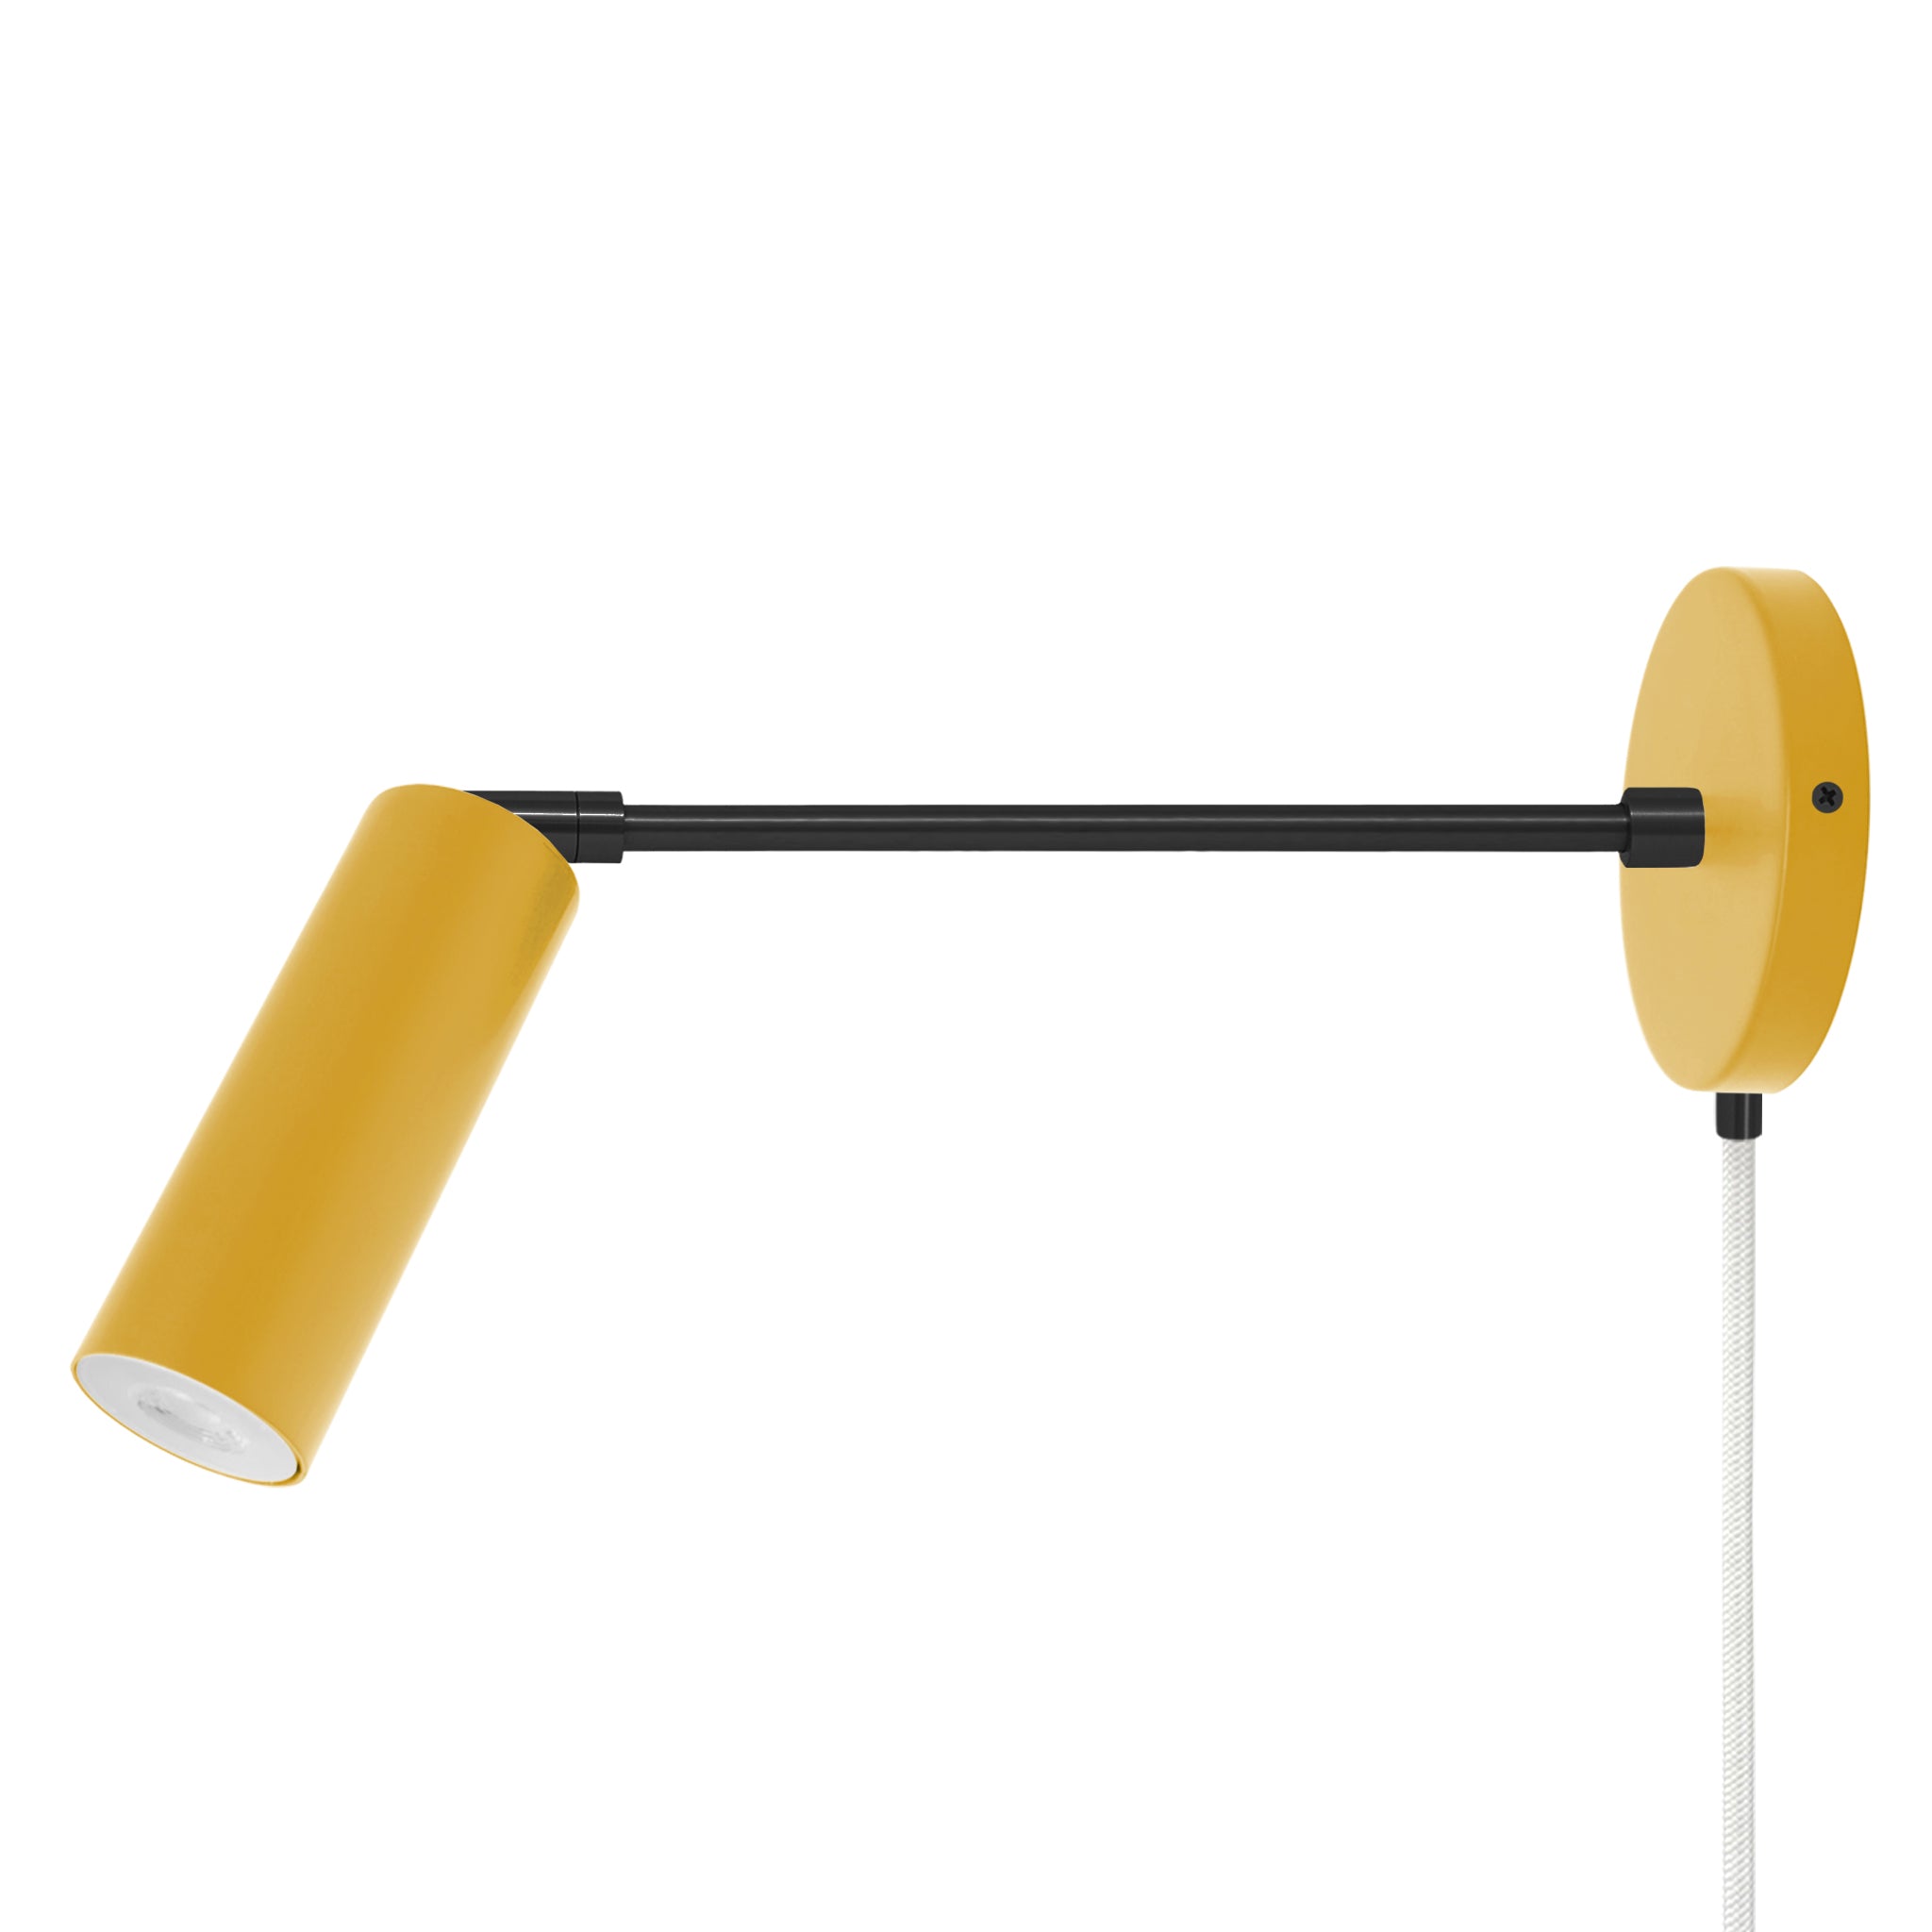 Black and ochre color Reader plug-in sconce 10" arm Dutton Brown lighting